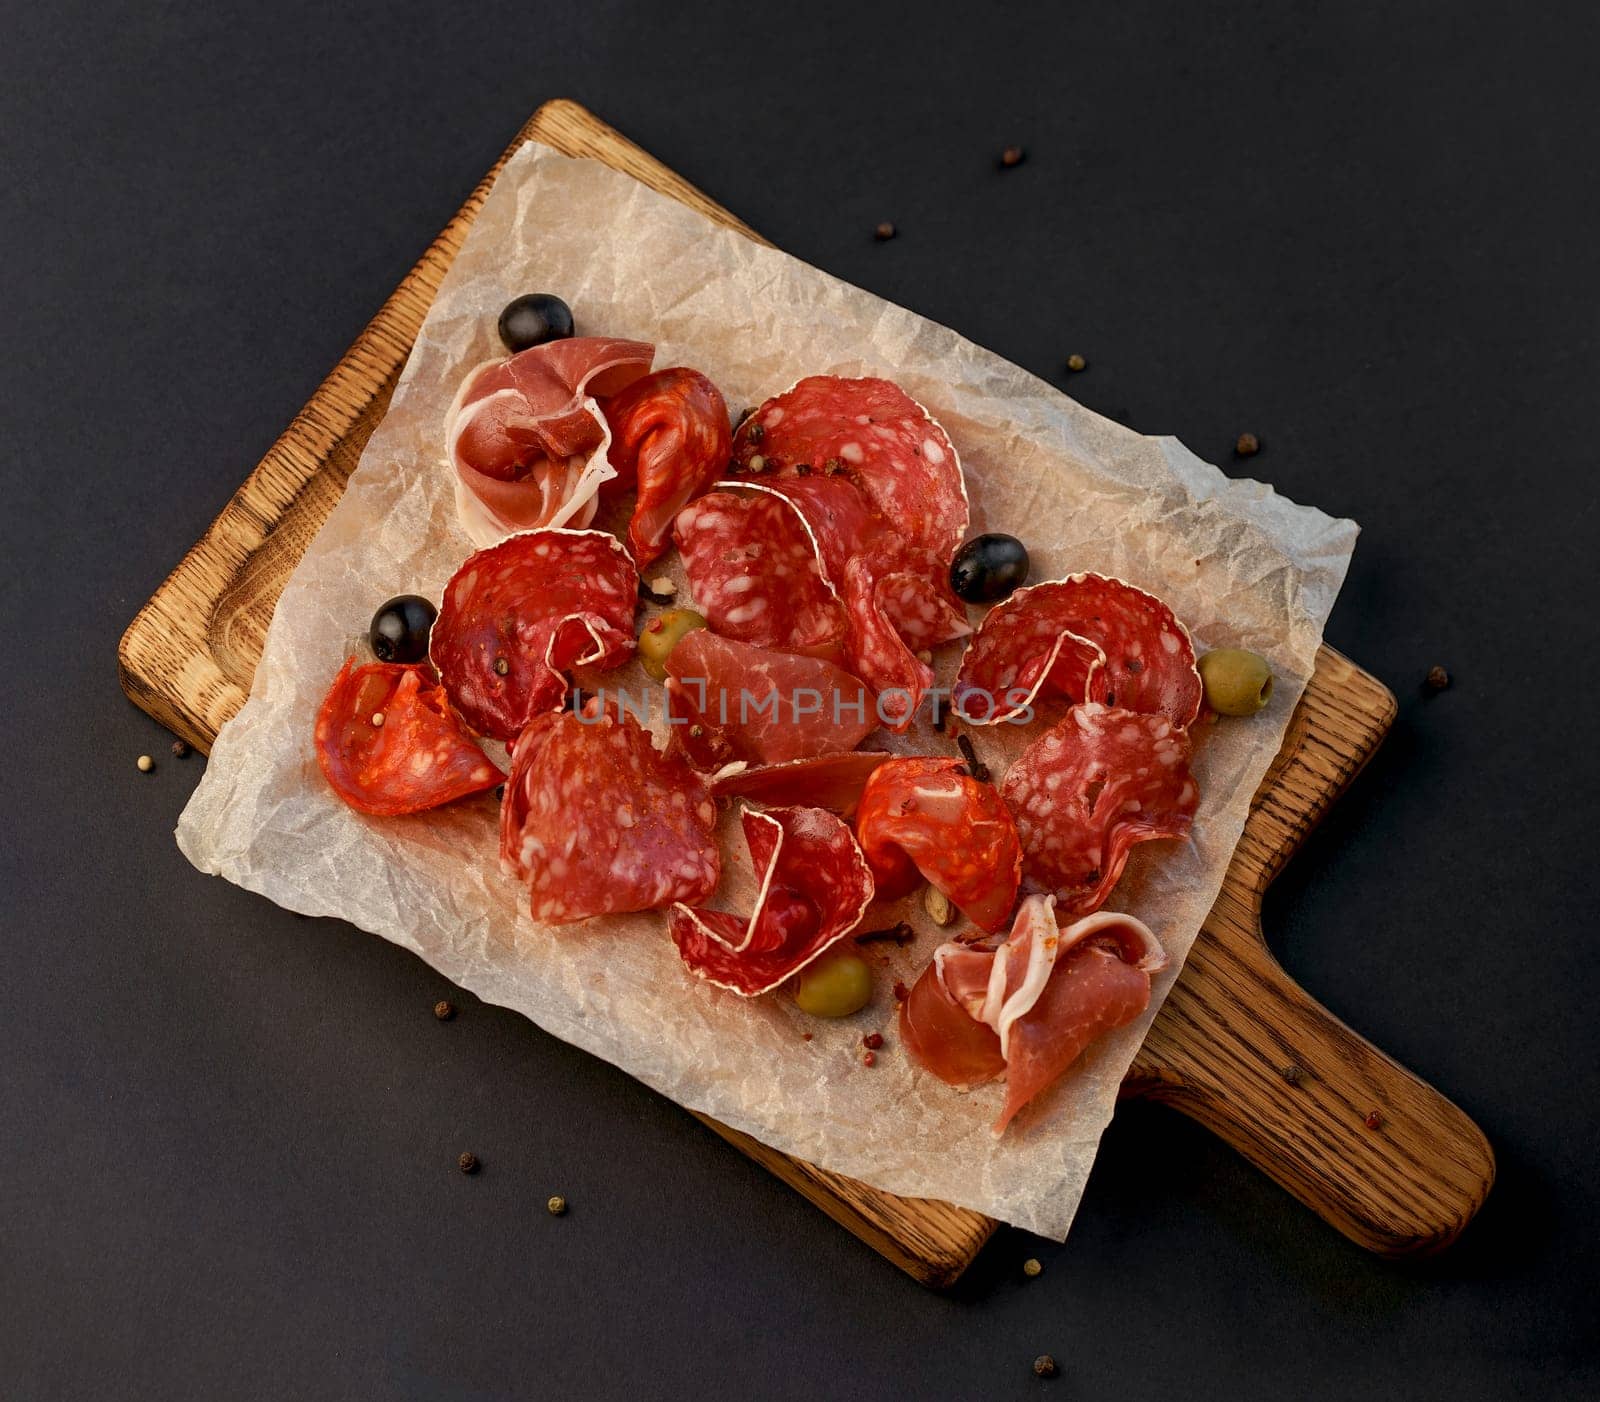 Meat Charcuterie Plate with Prosciutto crudo, Salami and Coppa Sausage. Black background. Top view. by aprilphoto